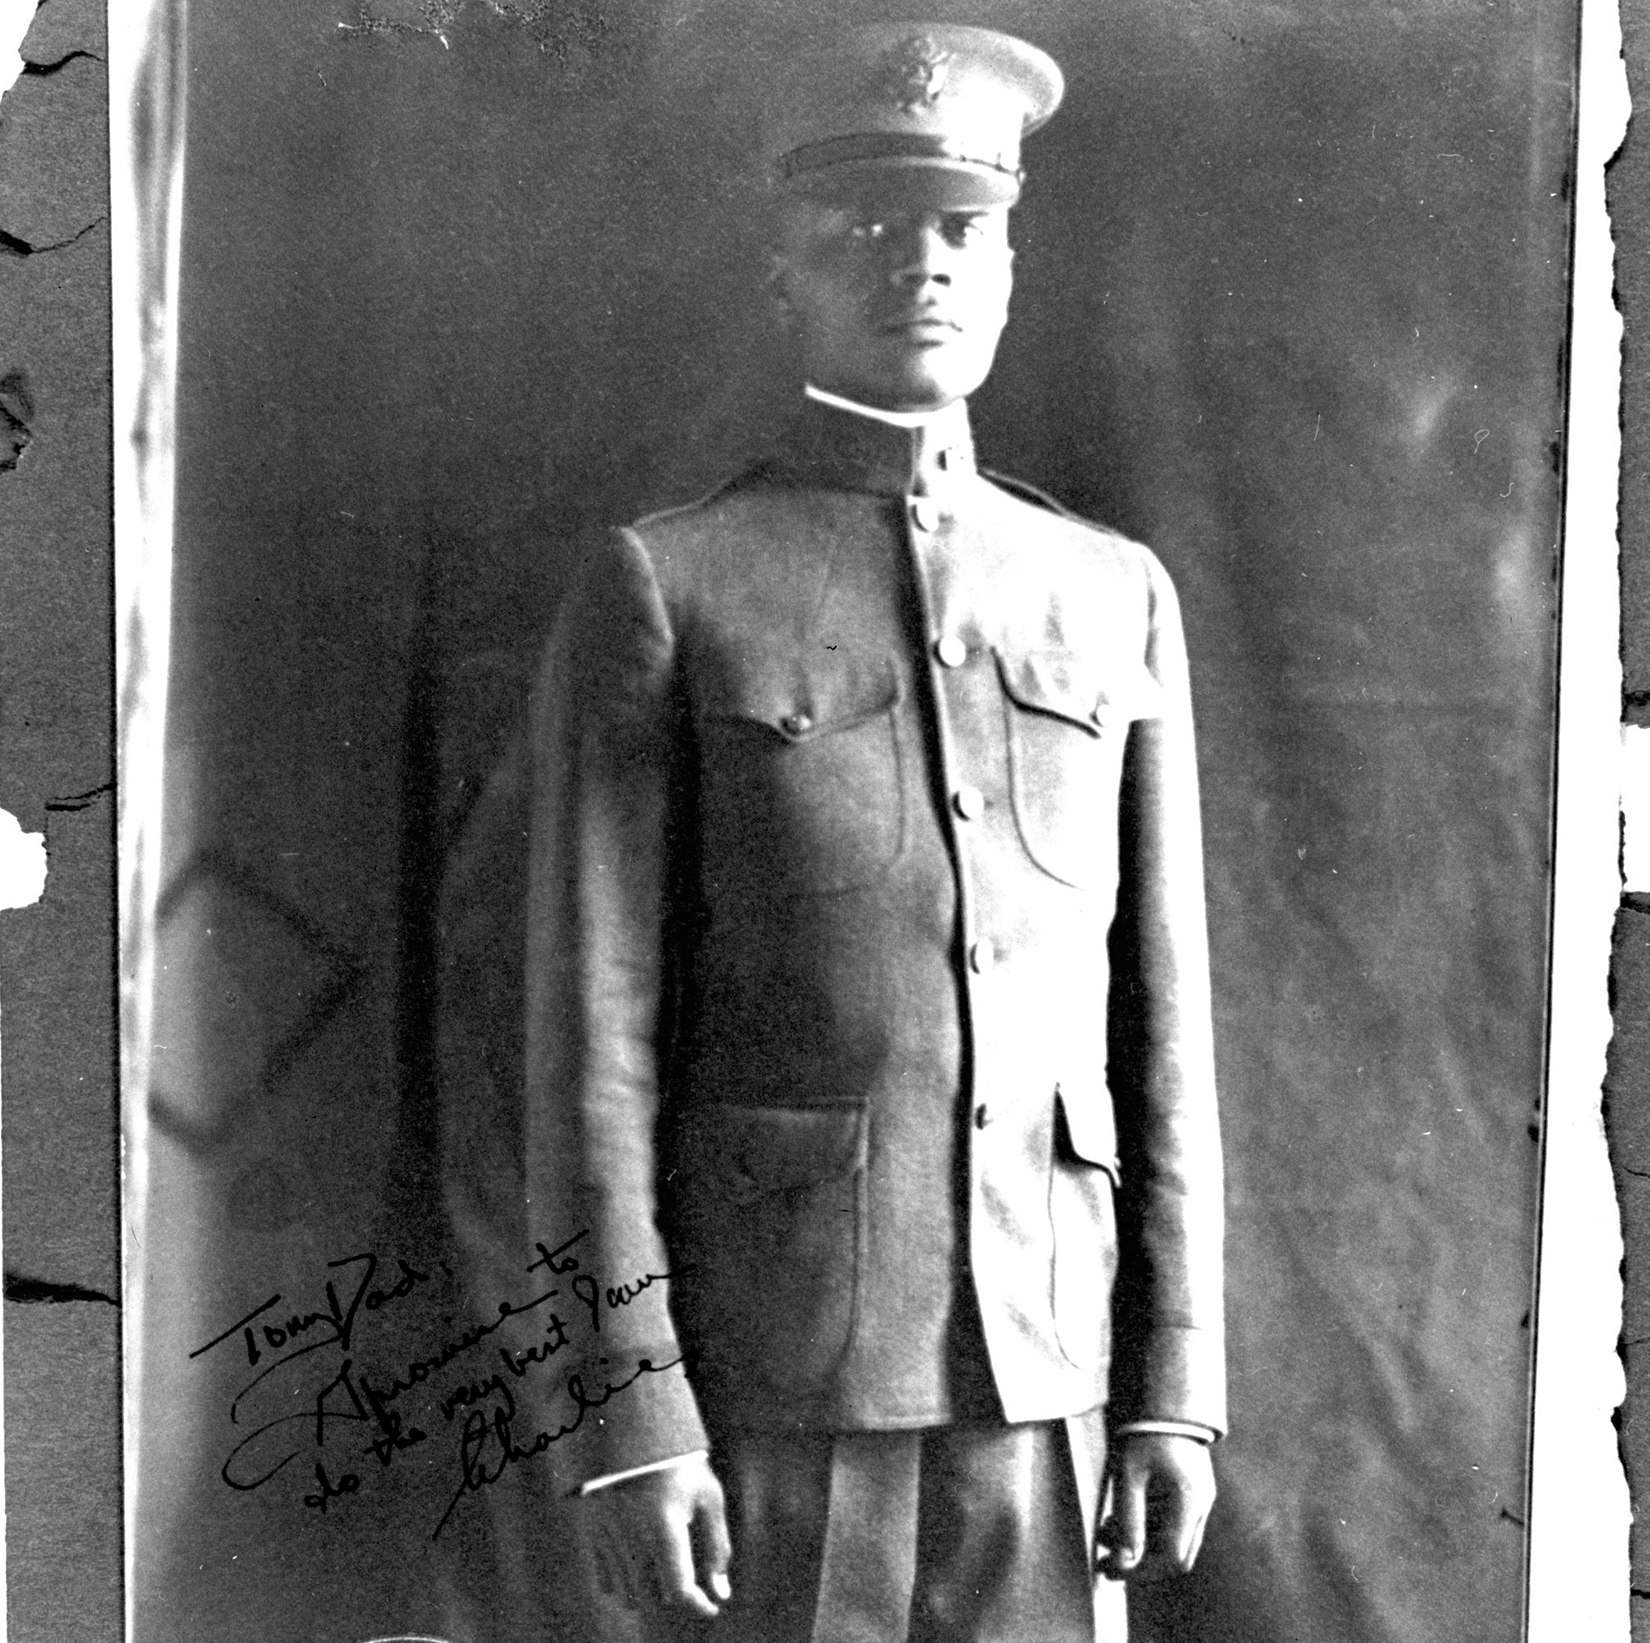 A military portrait of Houston, in his First Lieutenant uniform, in the World War I era. The portrait is signed “To my Dad, I promise to do the very best I can. Charlie.”